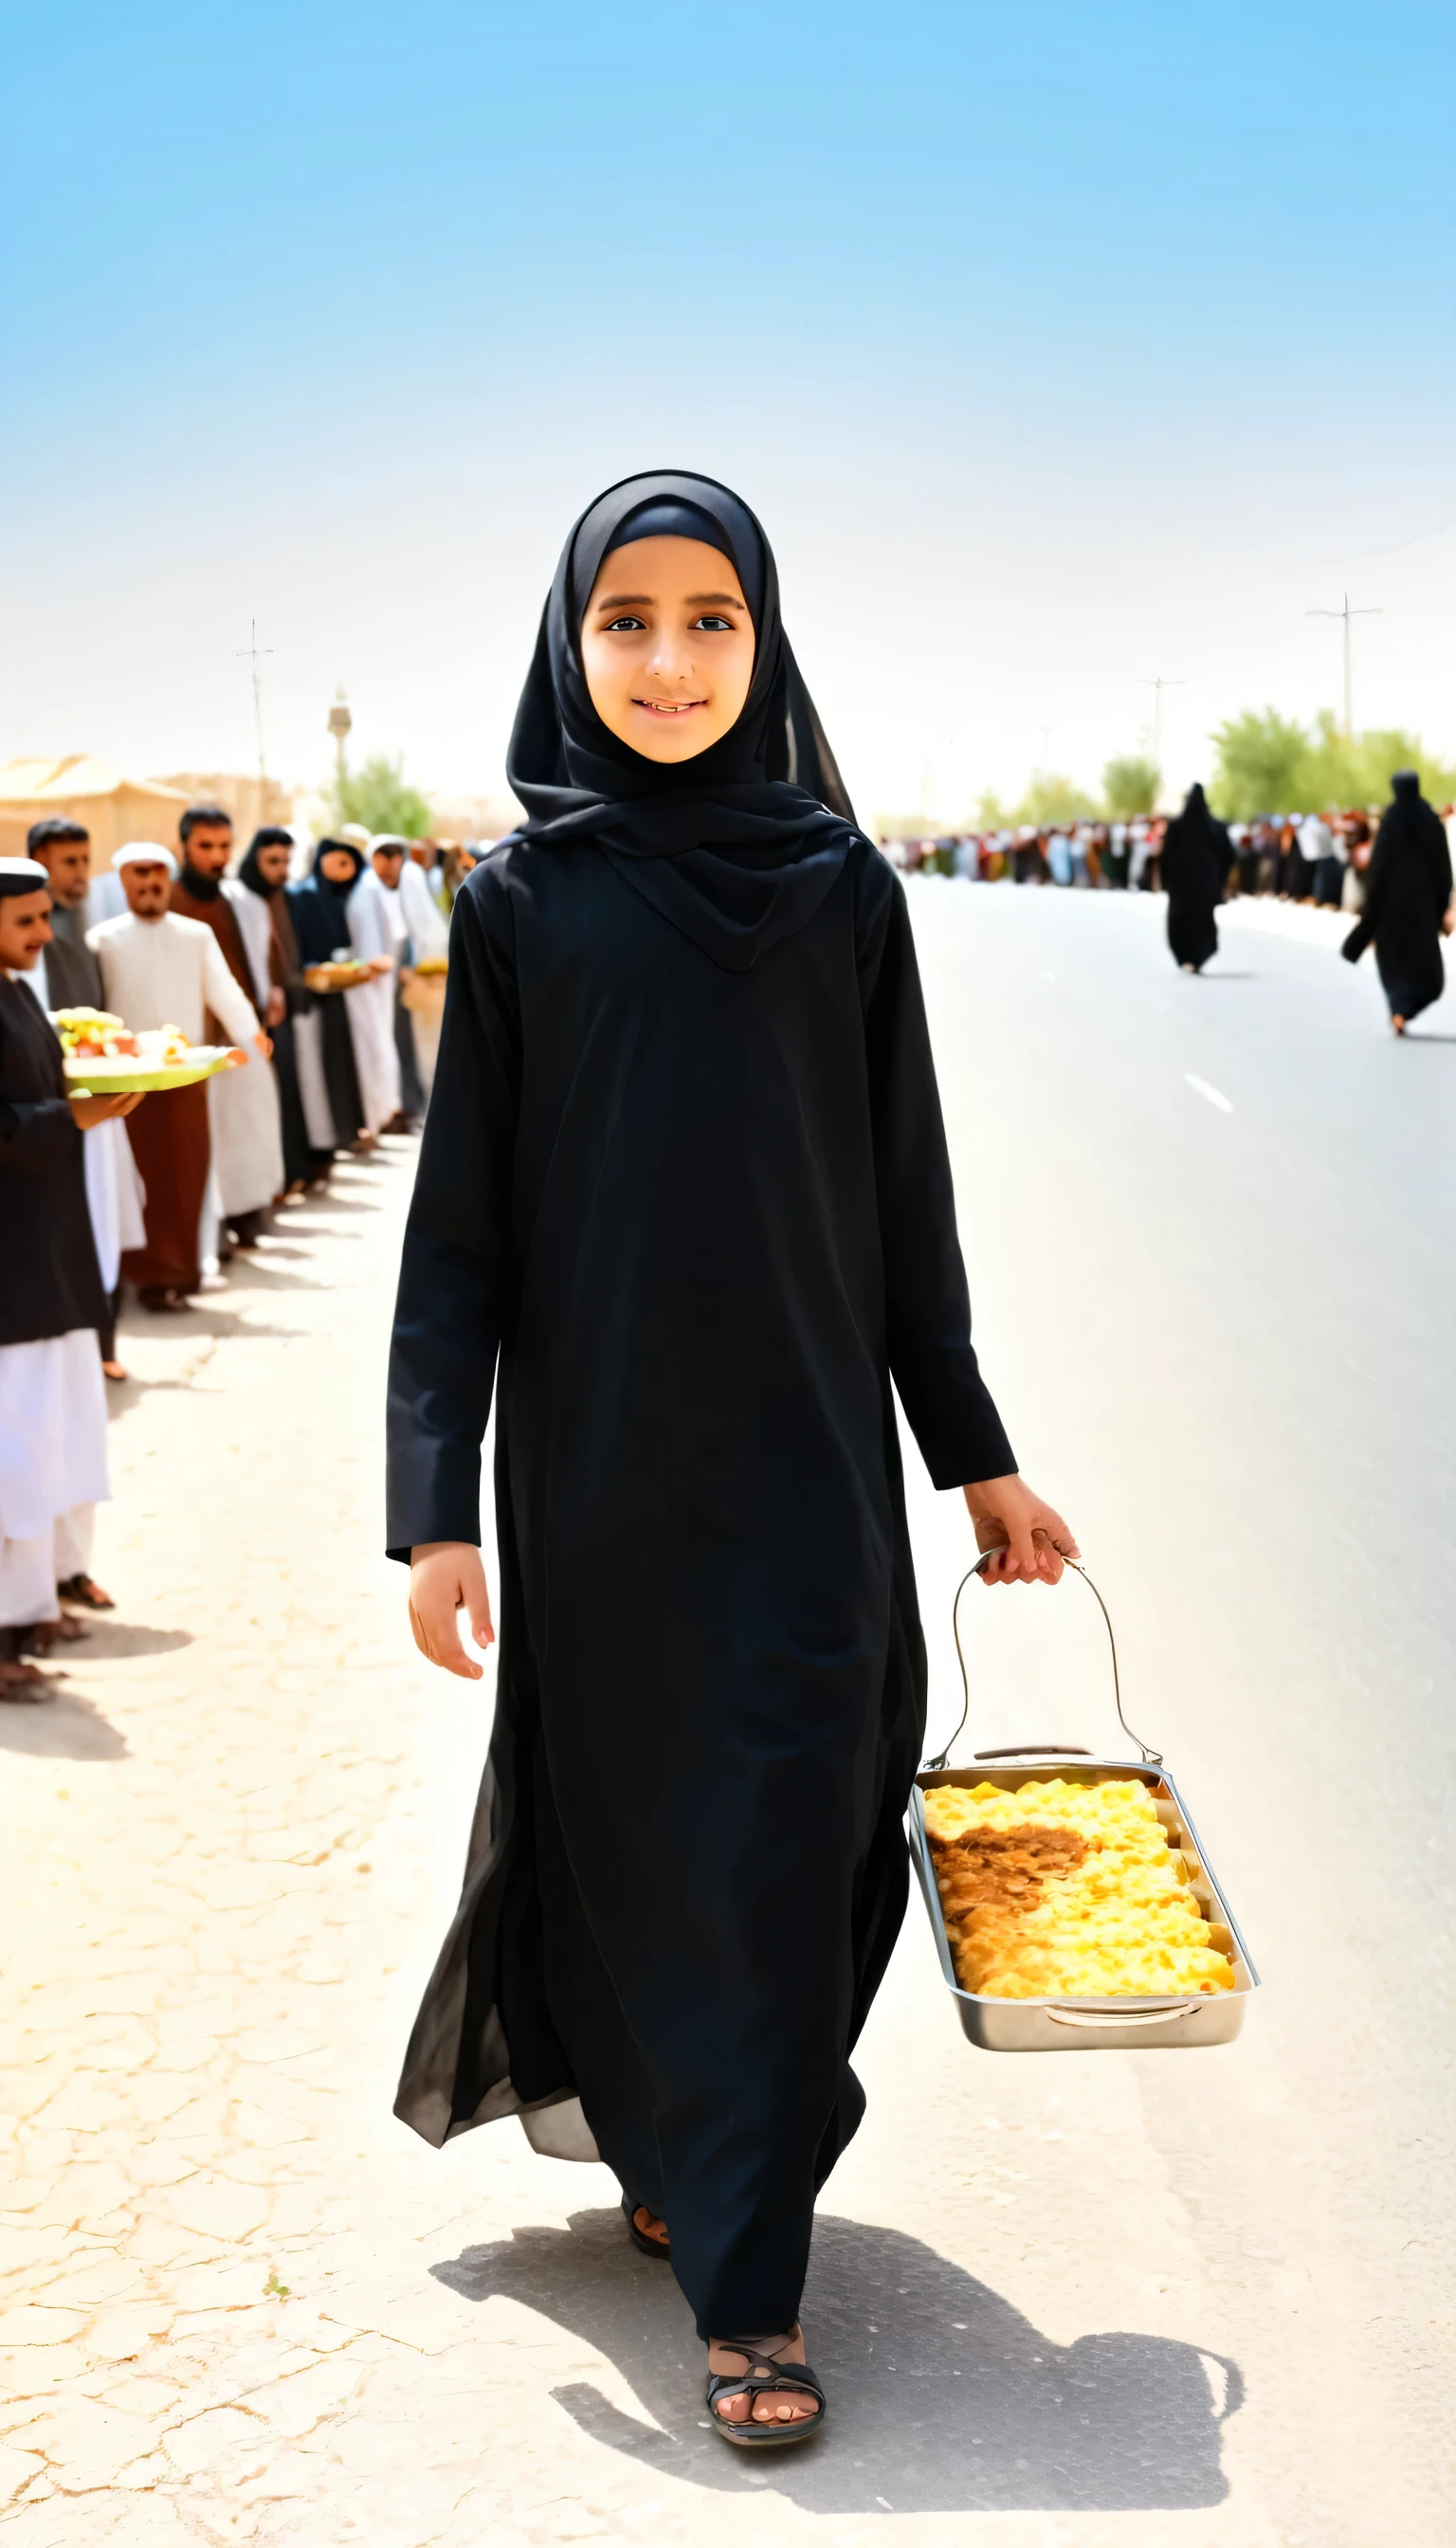 6years old Arab girl wearing a black dress and hijab walking outdoors, crowd, religious festivity, holding, holding_tray, food, offering food, background includes a road, sky, day, looking_at_viewer